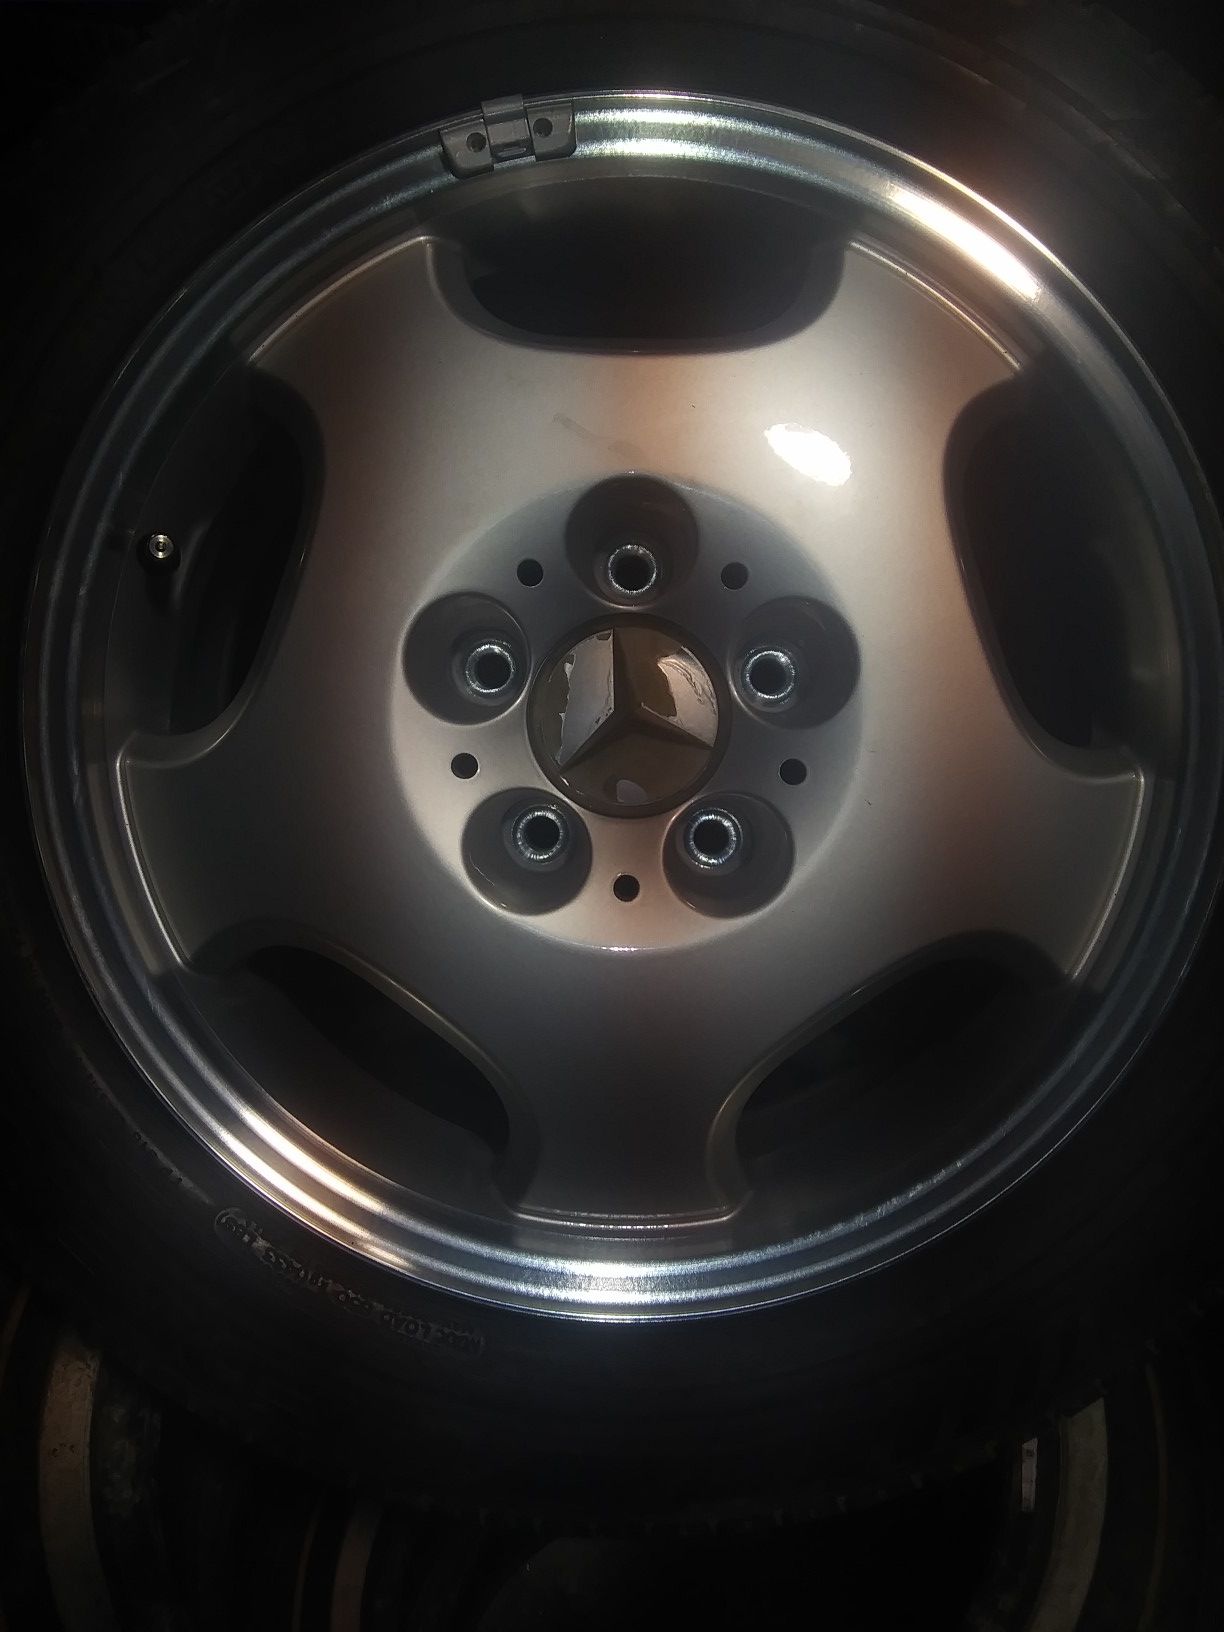 Brand new Mercedes rim and tire for spare